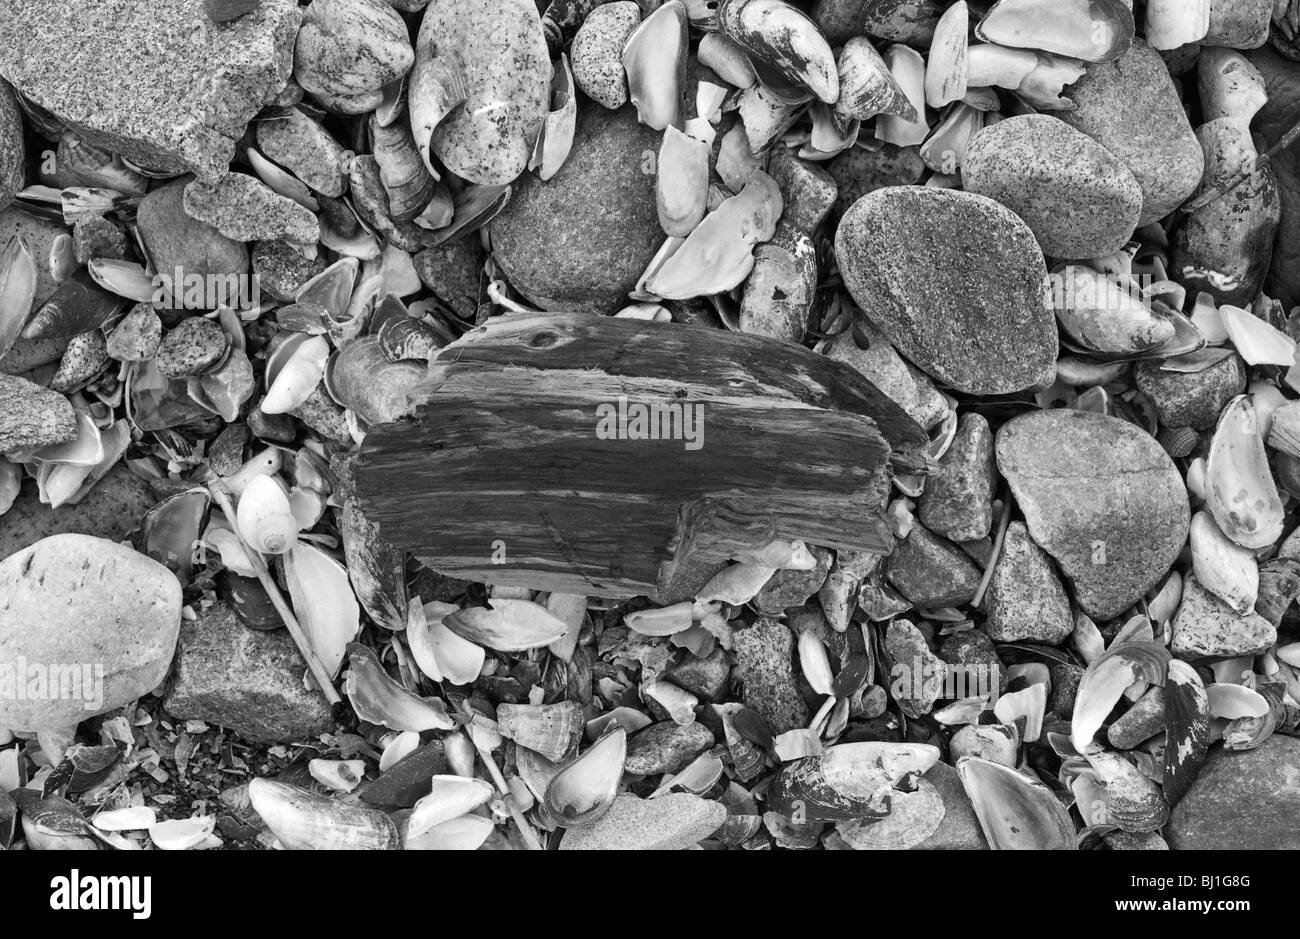 Close up view of pebbles and beach rubbish - black and white - Nigg bay - Torry - Aberdeen Stock Photo